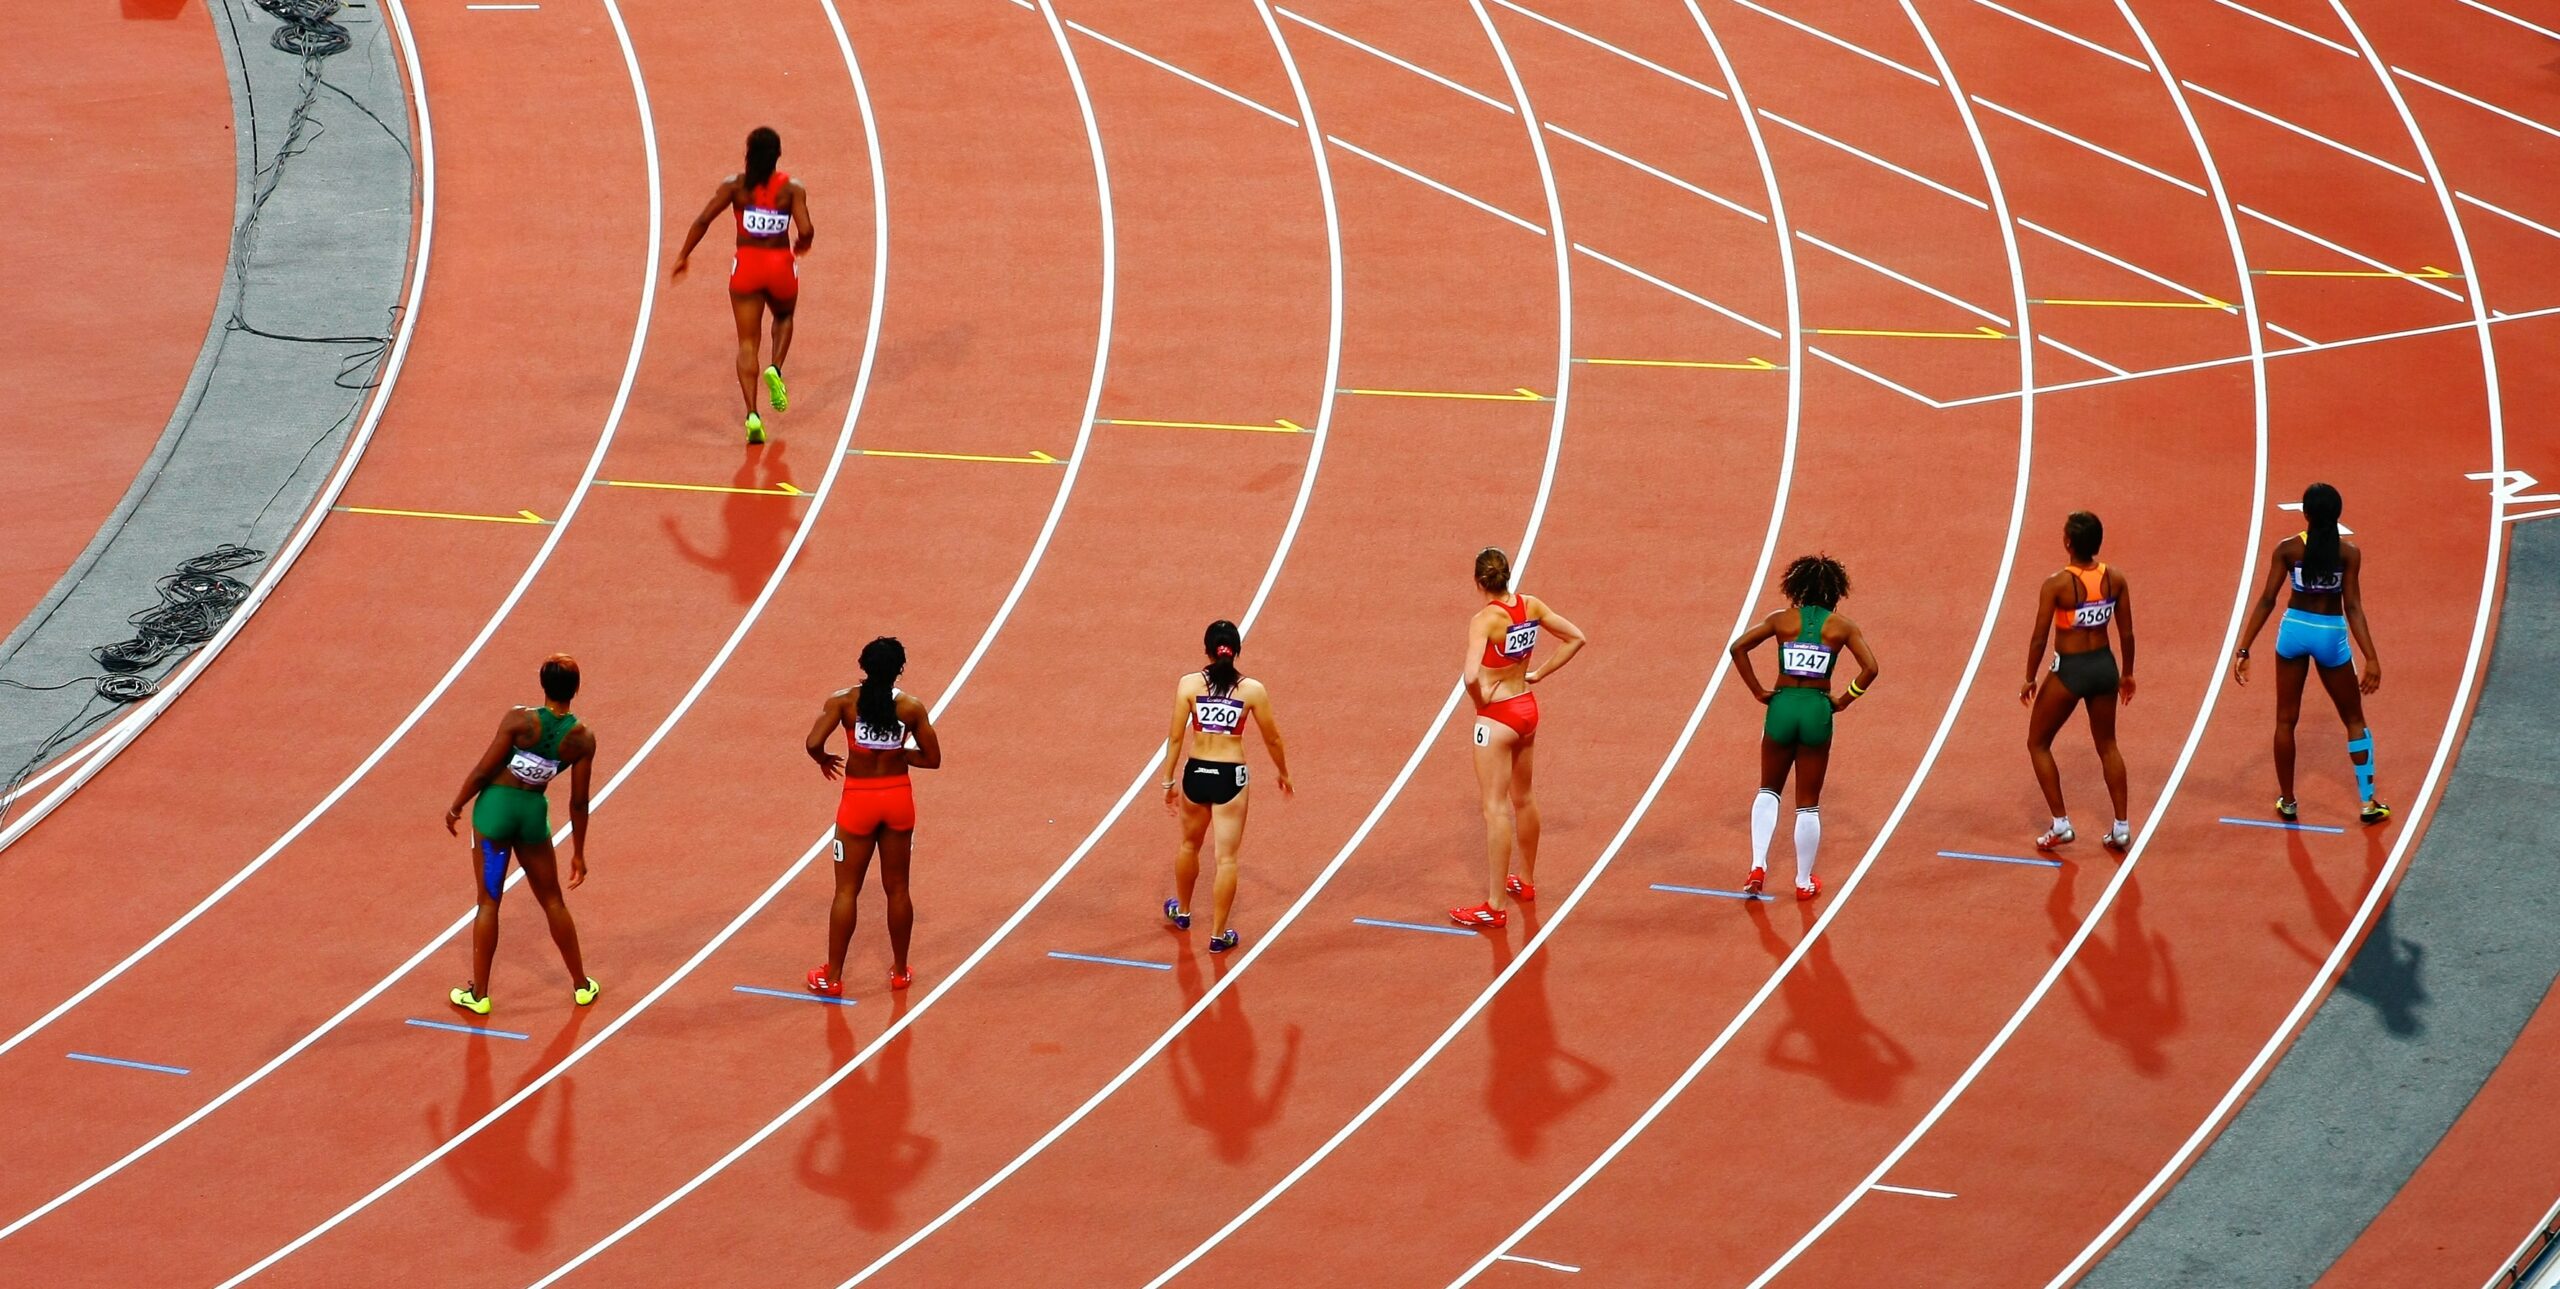 racers at a track meet